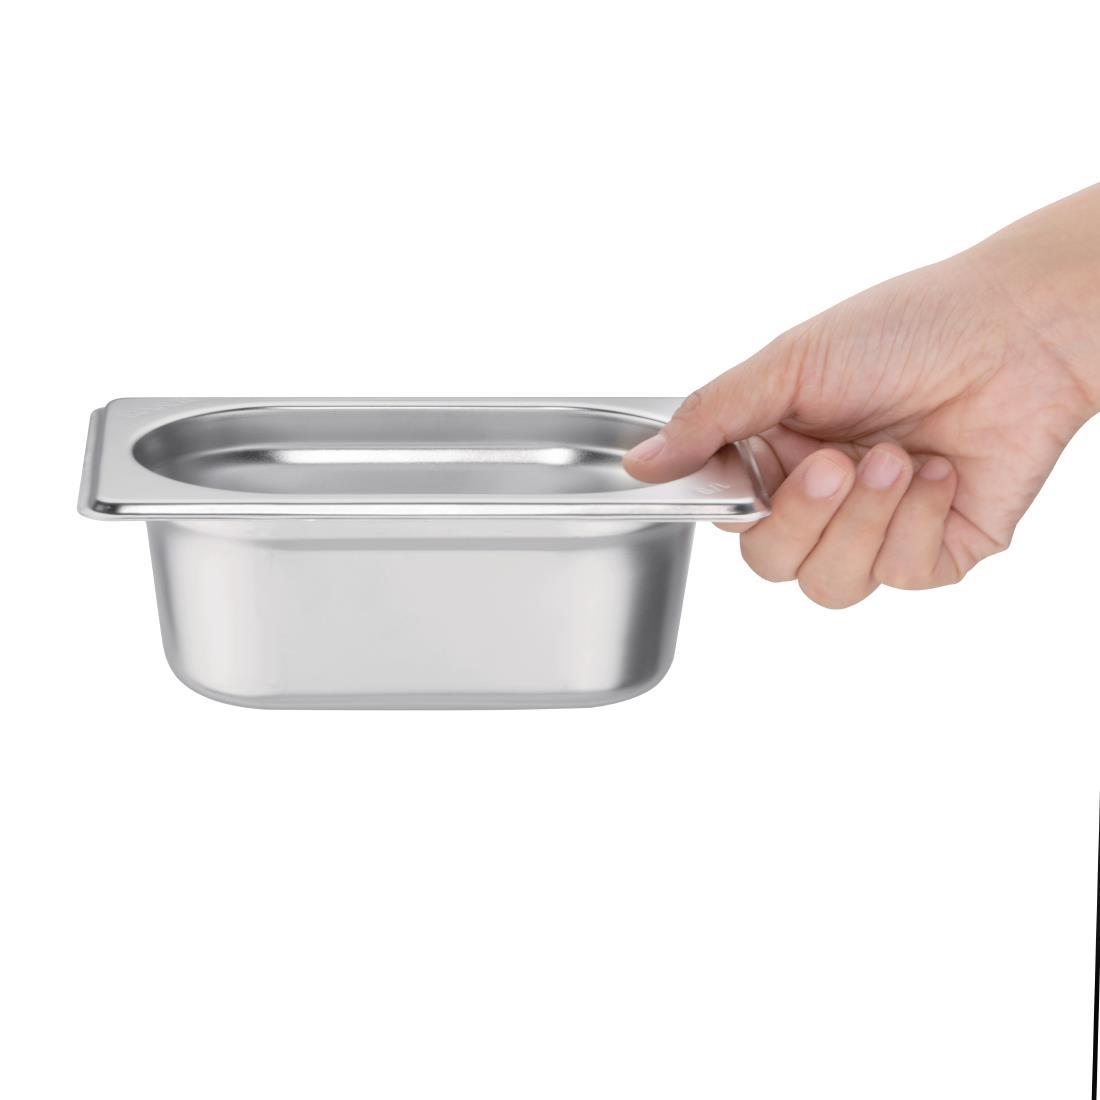 Vogue Stainless Steel 1/9 Gastronorm Pan 65mm - K824  - 3